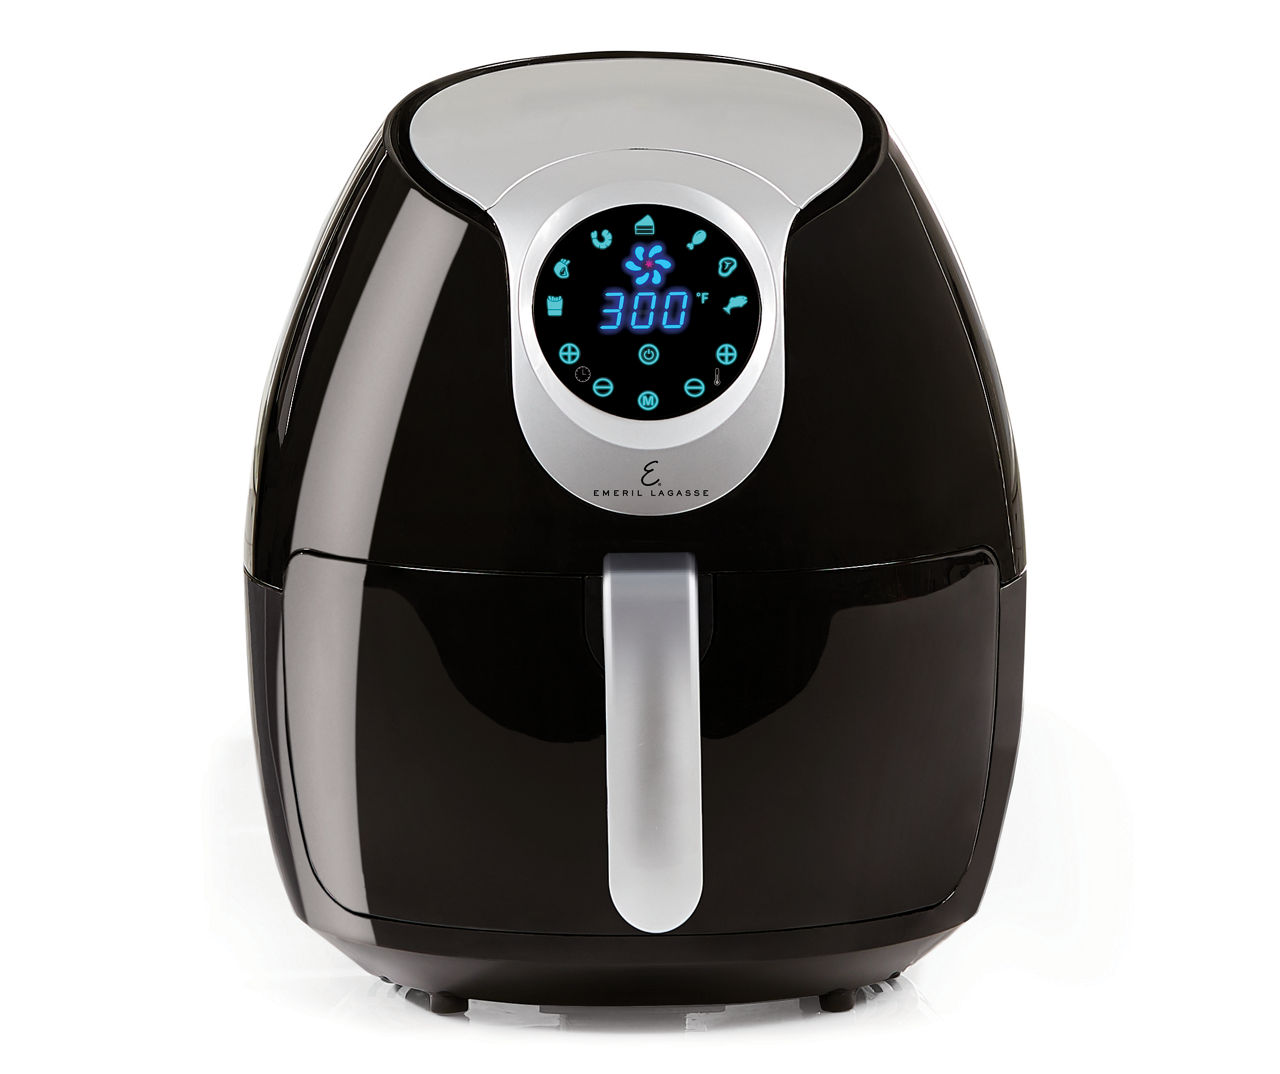 Get this Emeril Lagasse air fryer for $90 less